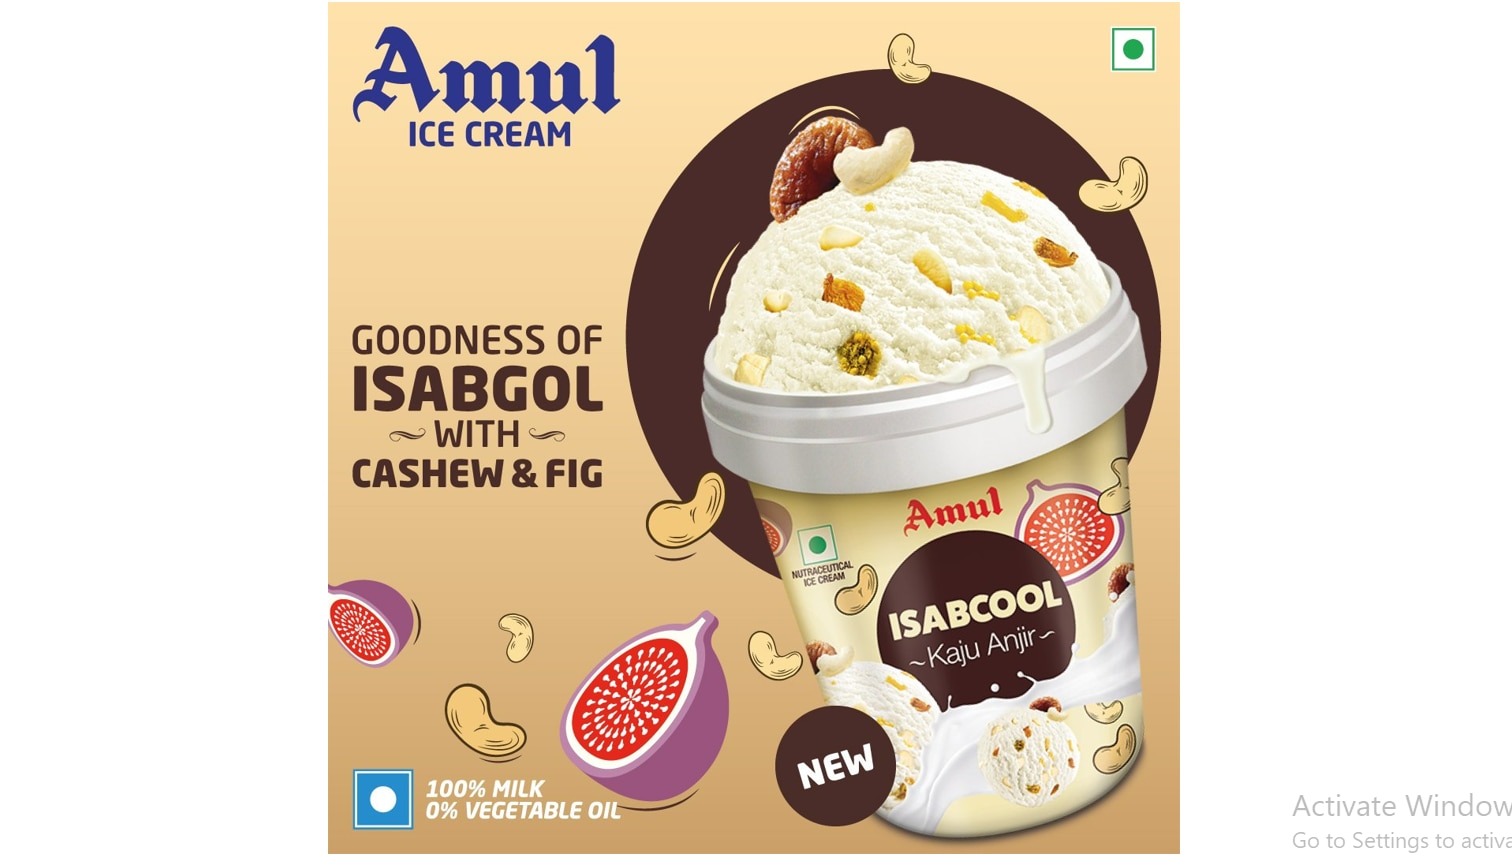 Amul - Ice Cream Transparent PNG - 800x800 - Free Download on NicePNG